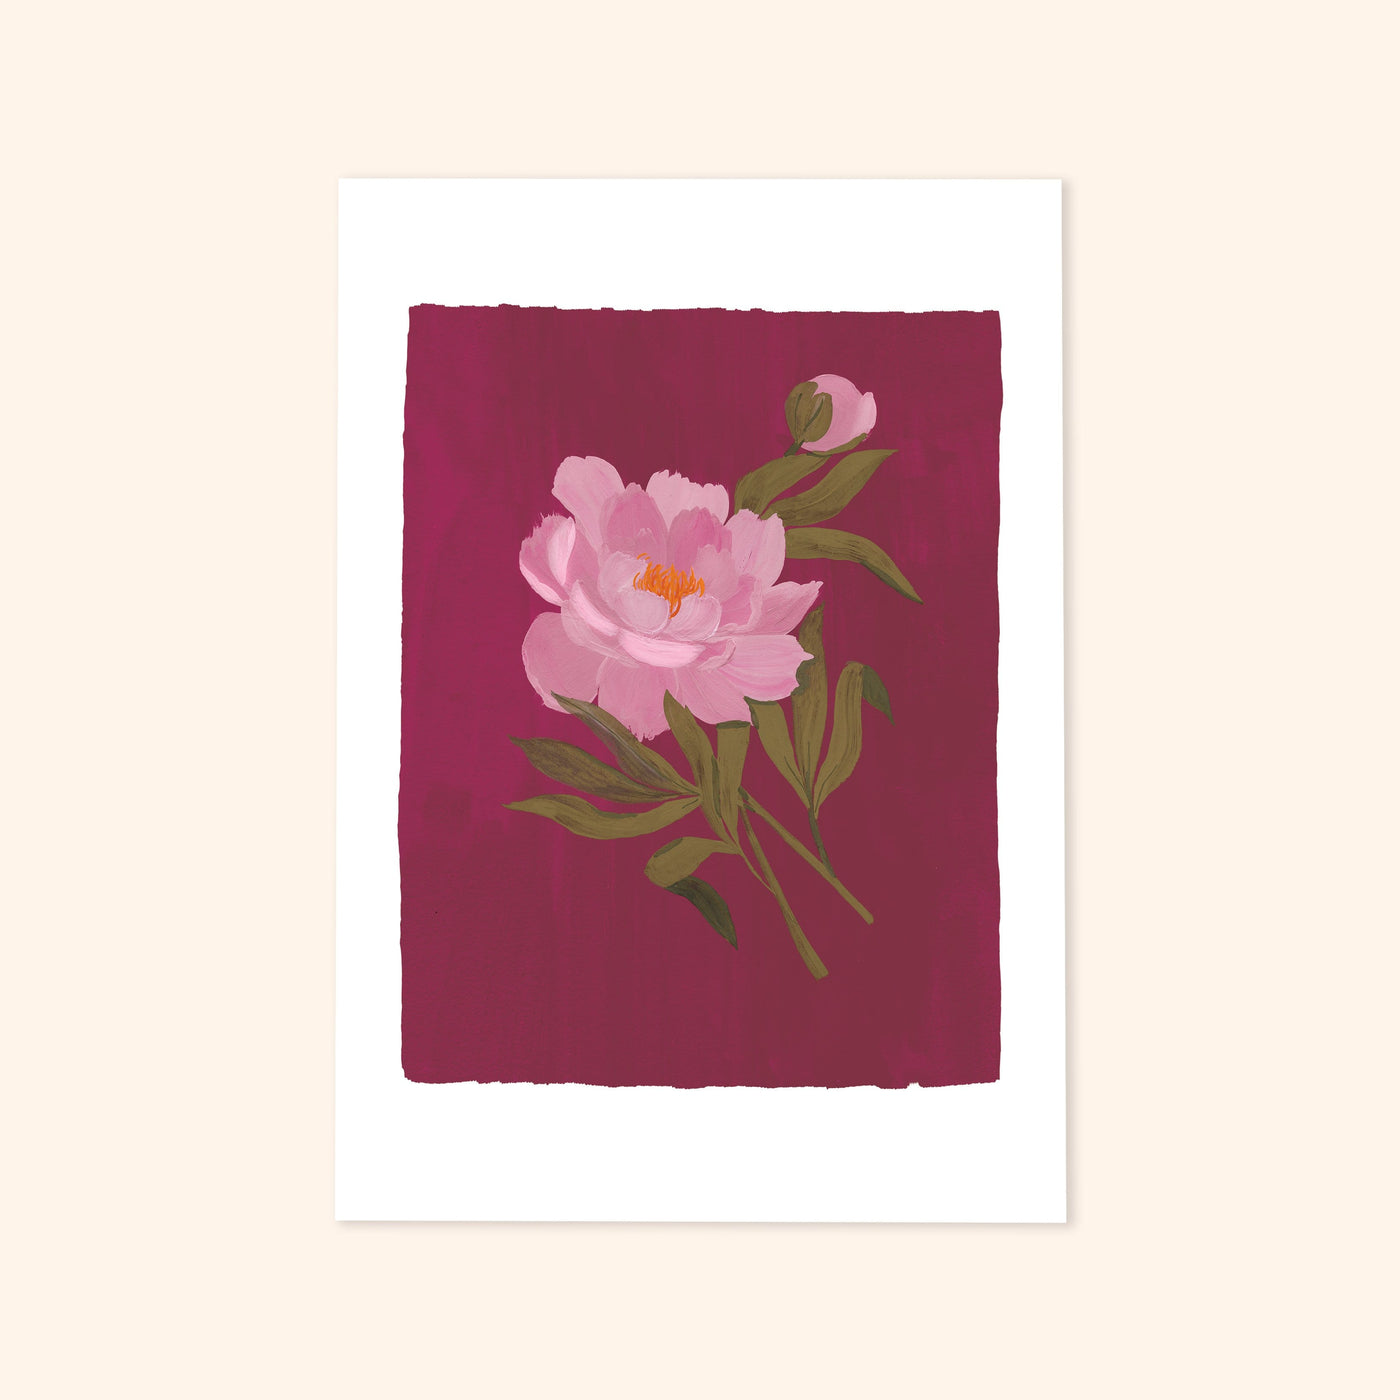 A Botanical Print Of A Pink Peony On A Burgundy Pink Background - Annie Dornan Smith